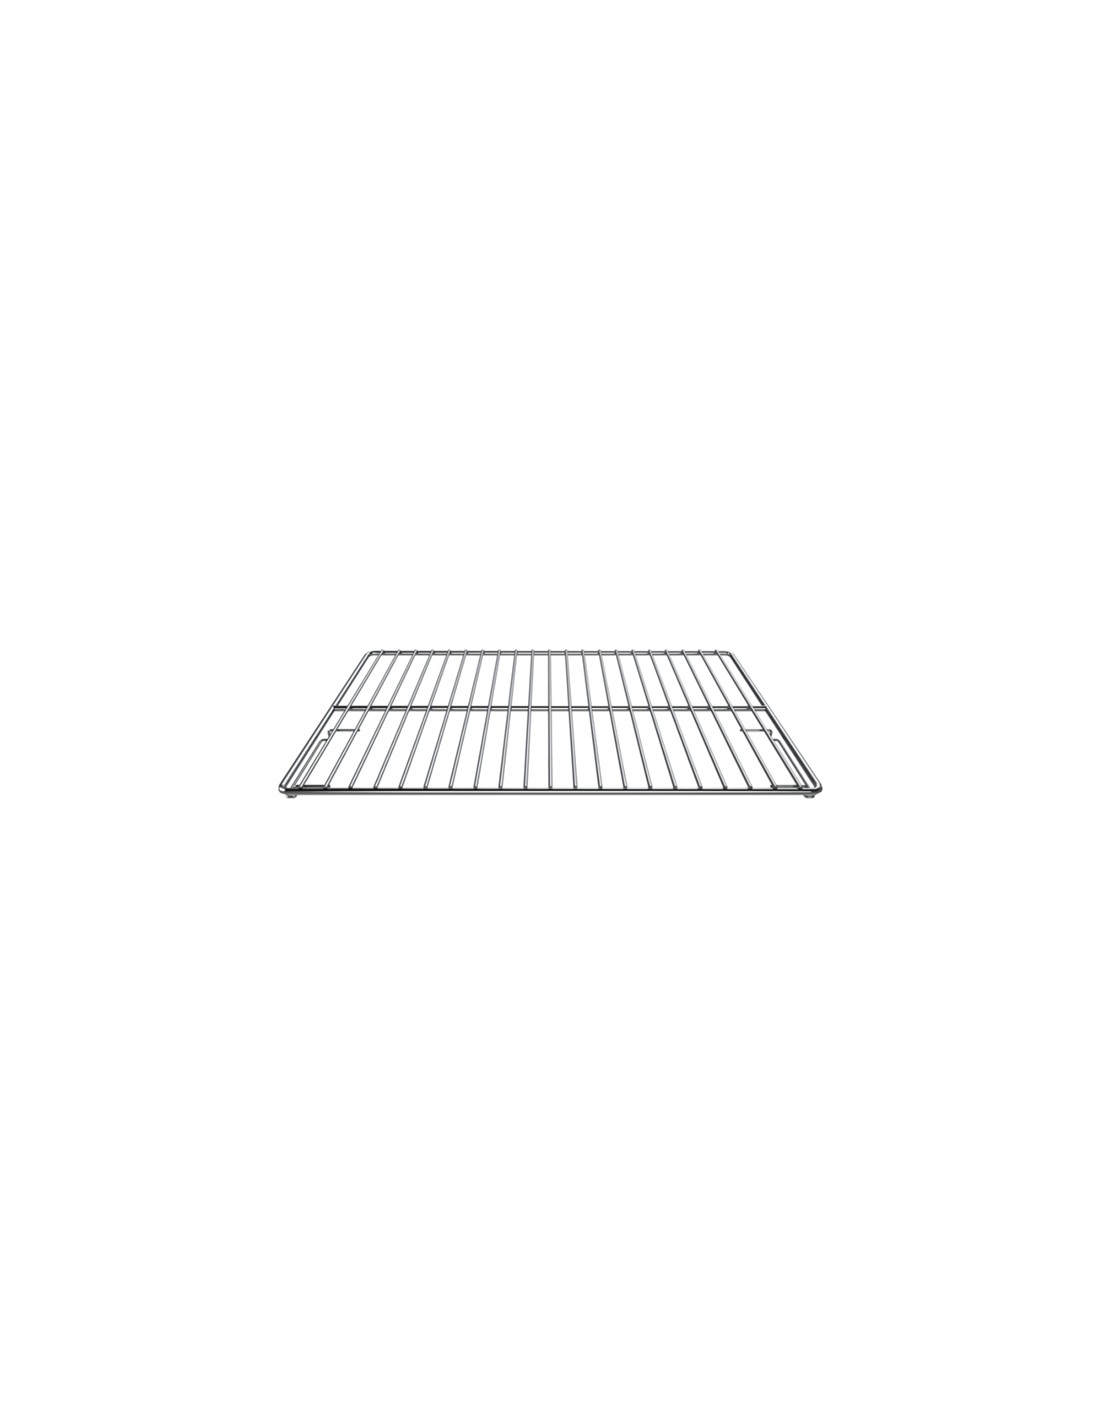 GN 1/1 stainless steel grid